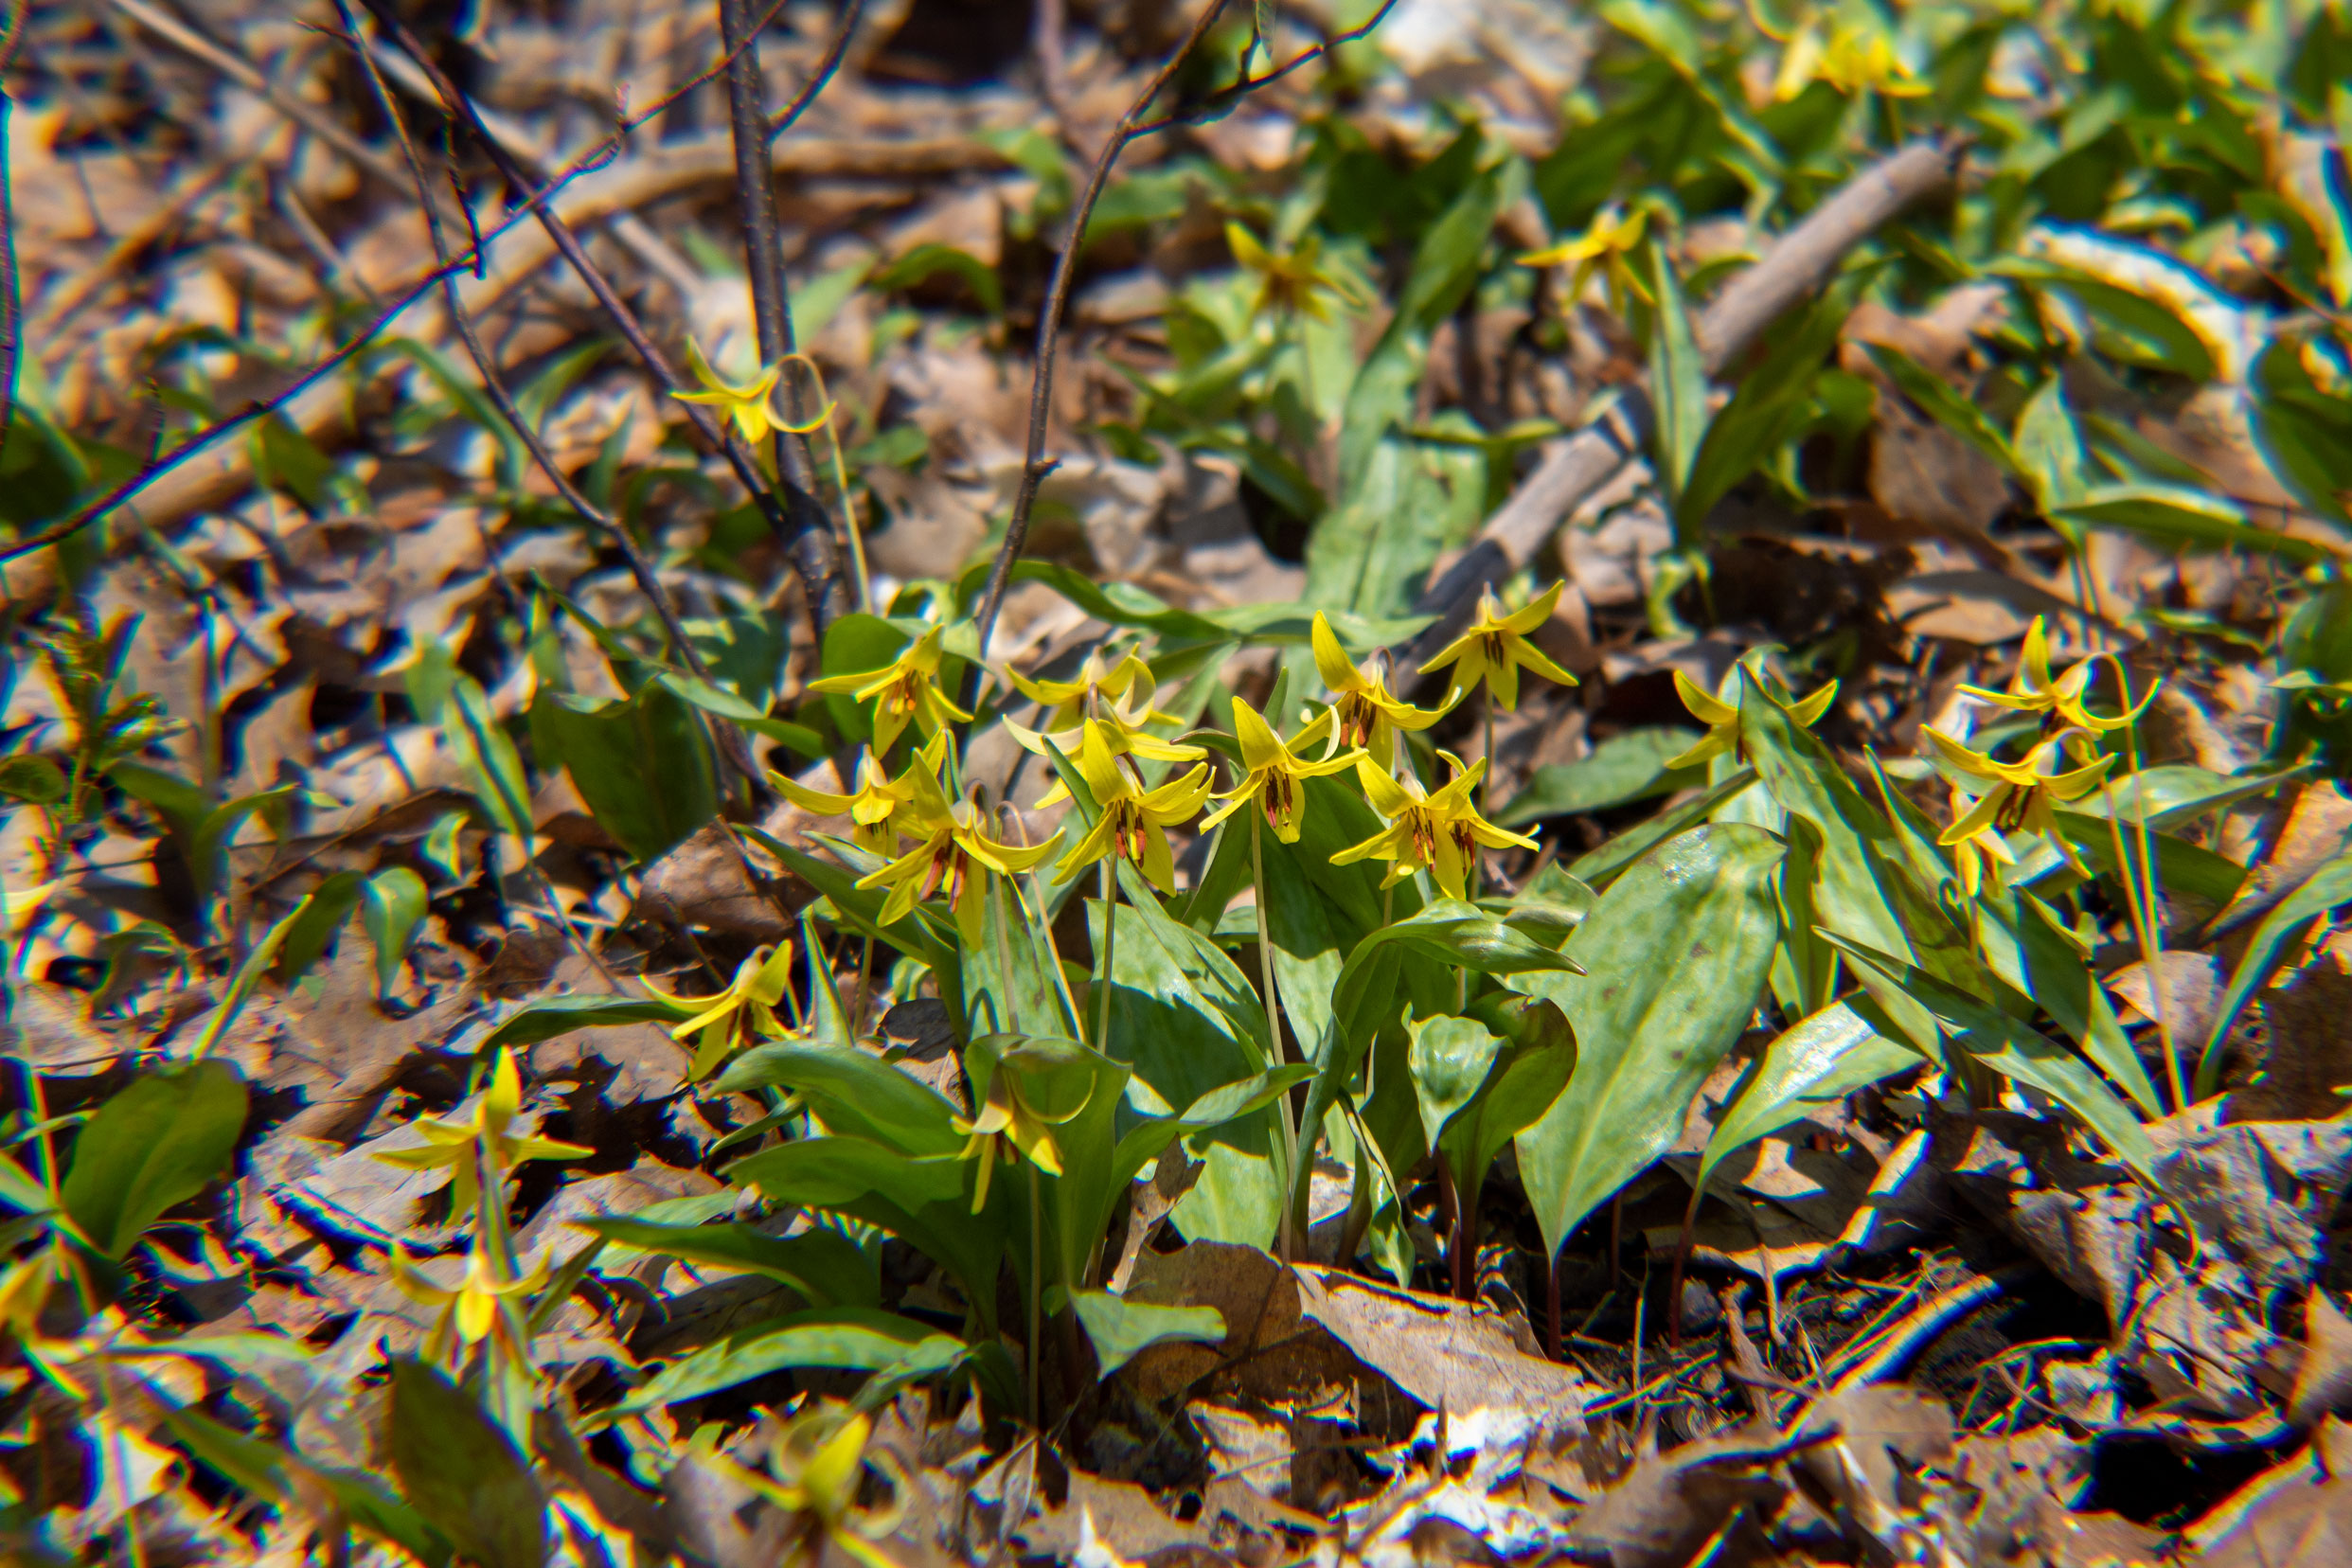 Many yellow flowers with wide patchy green/brown leaves